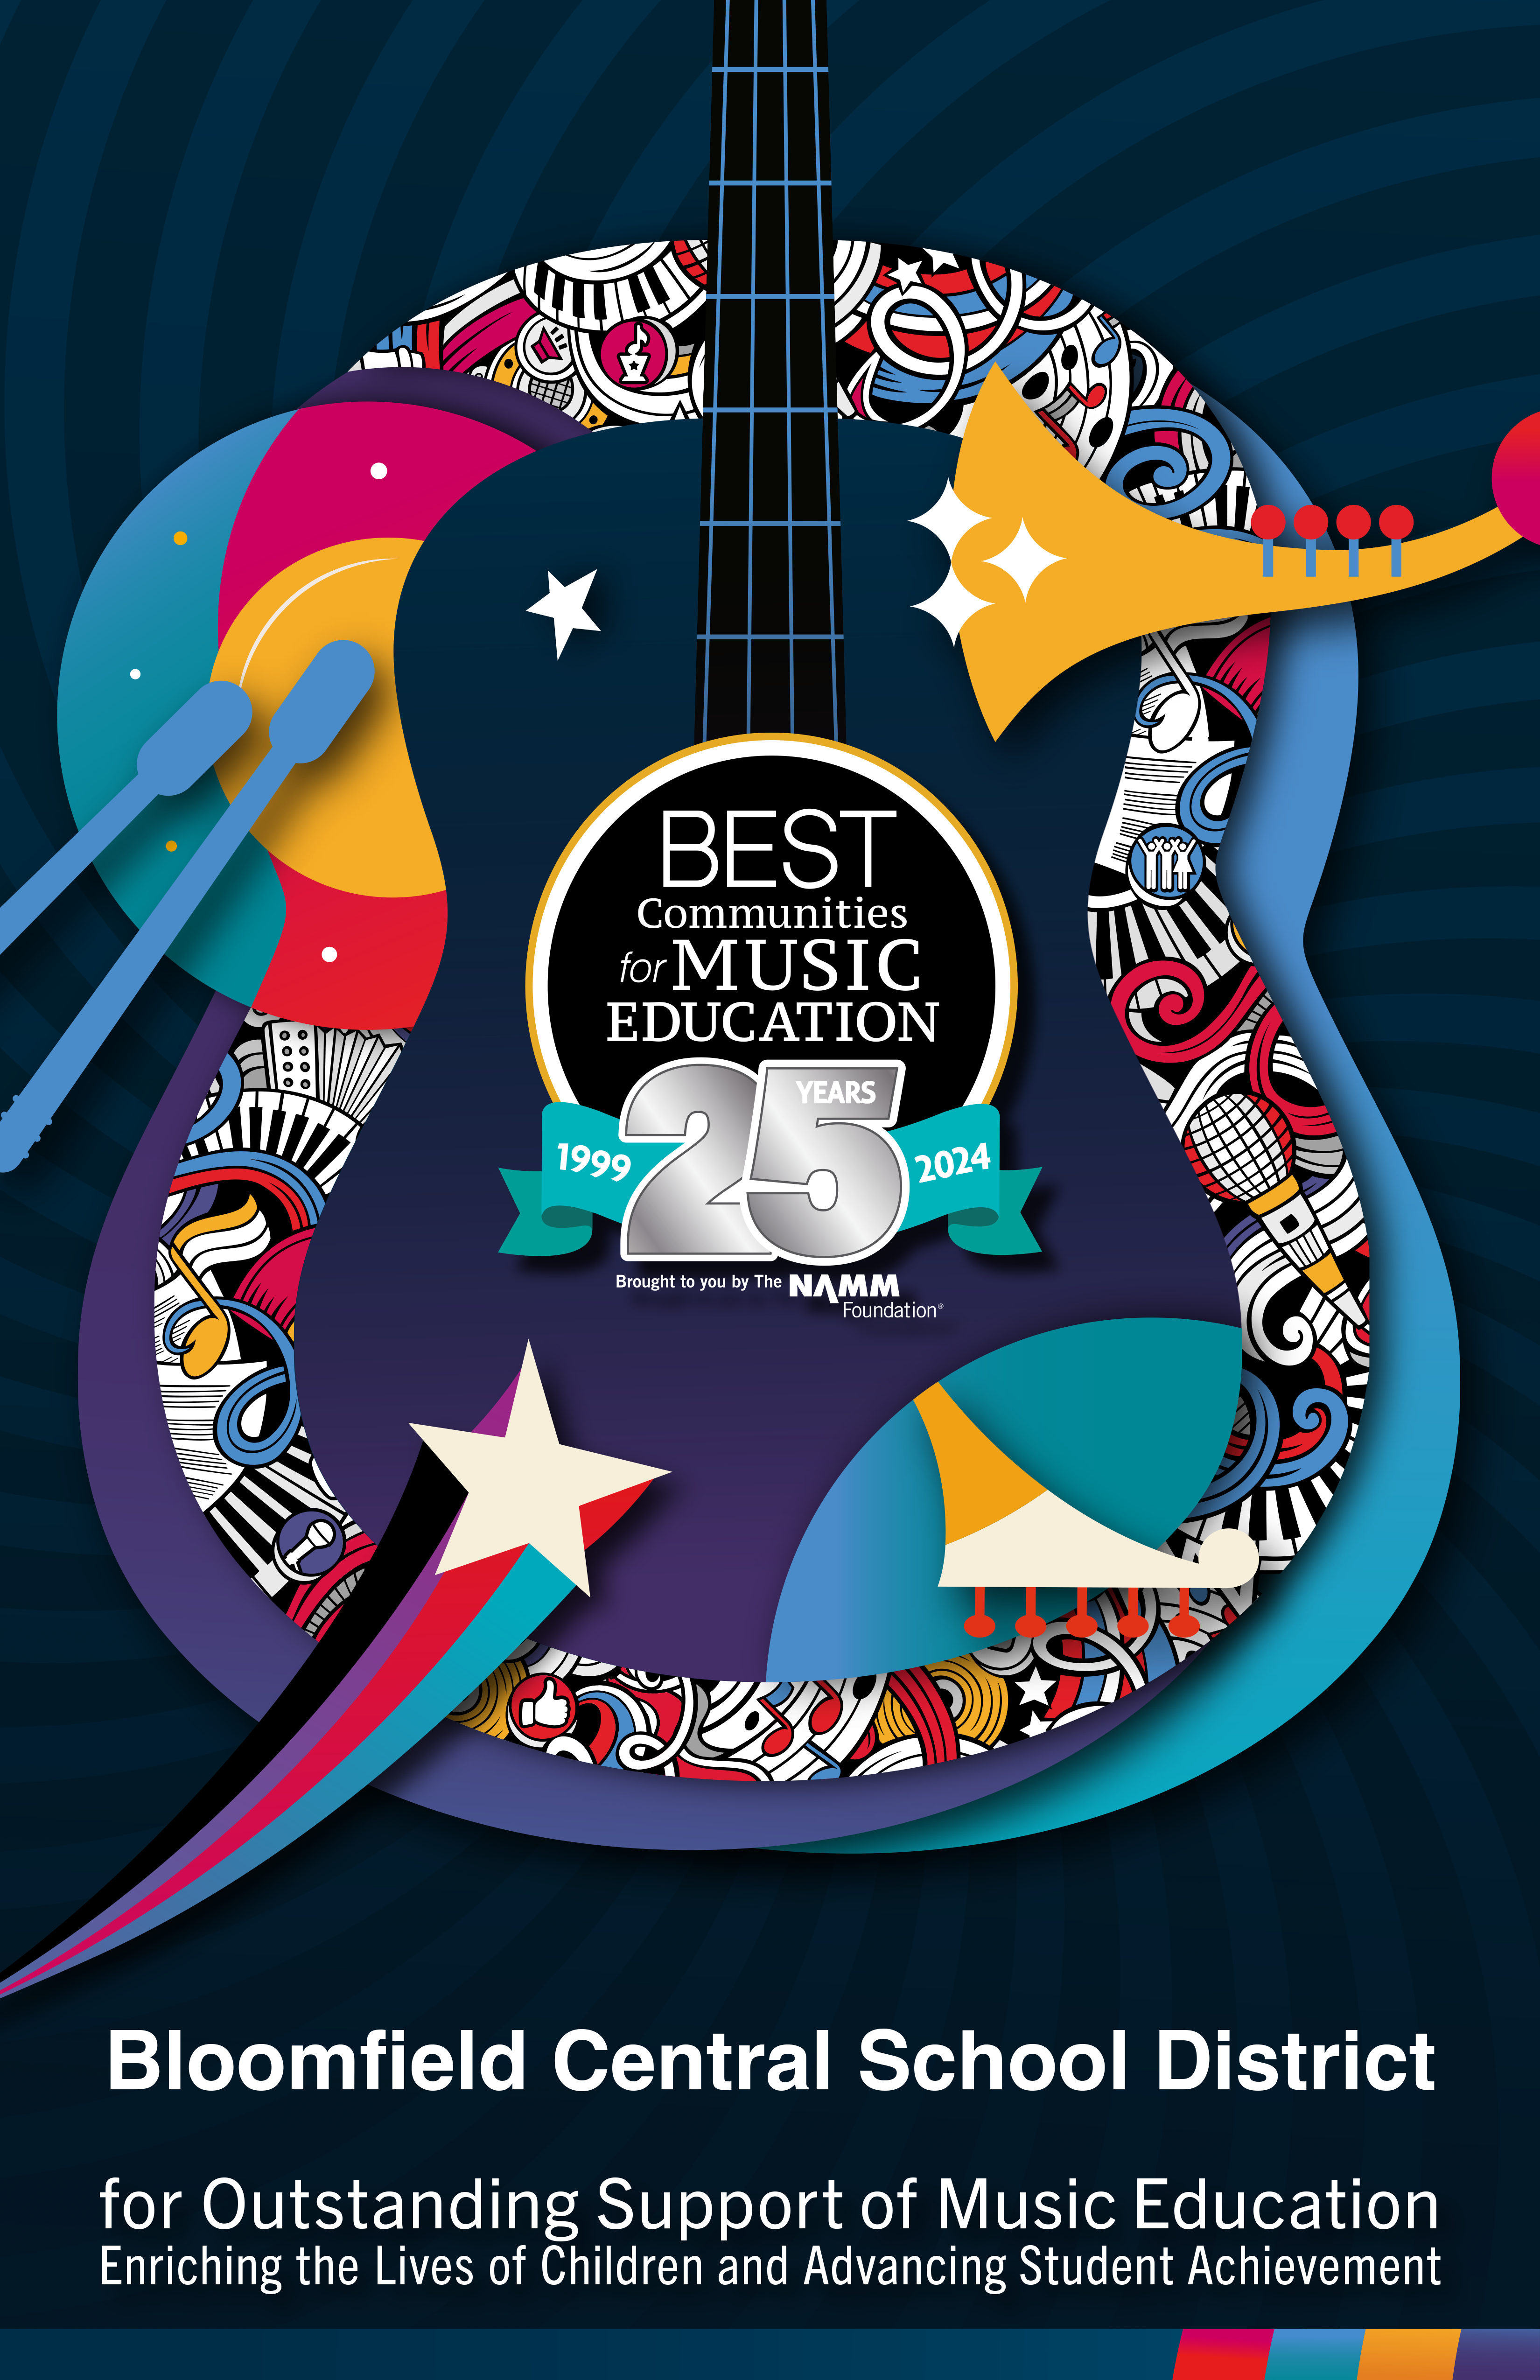 Bloomfield Named One Of The Best Communities For Music Education By The NAMM Foundation For The Third Consecutive Year